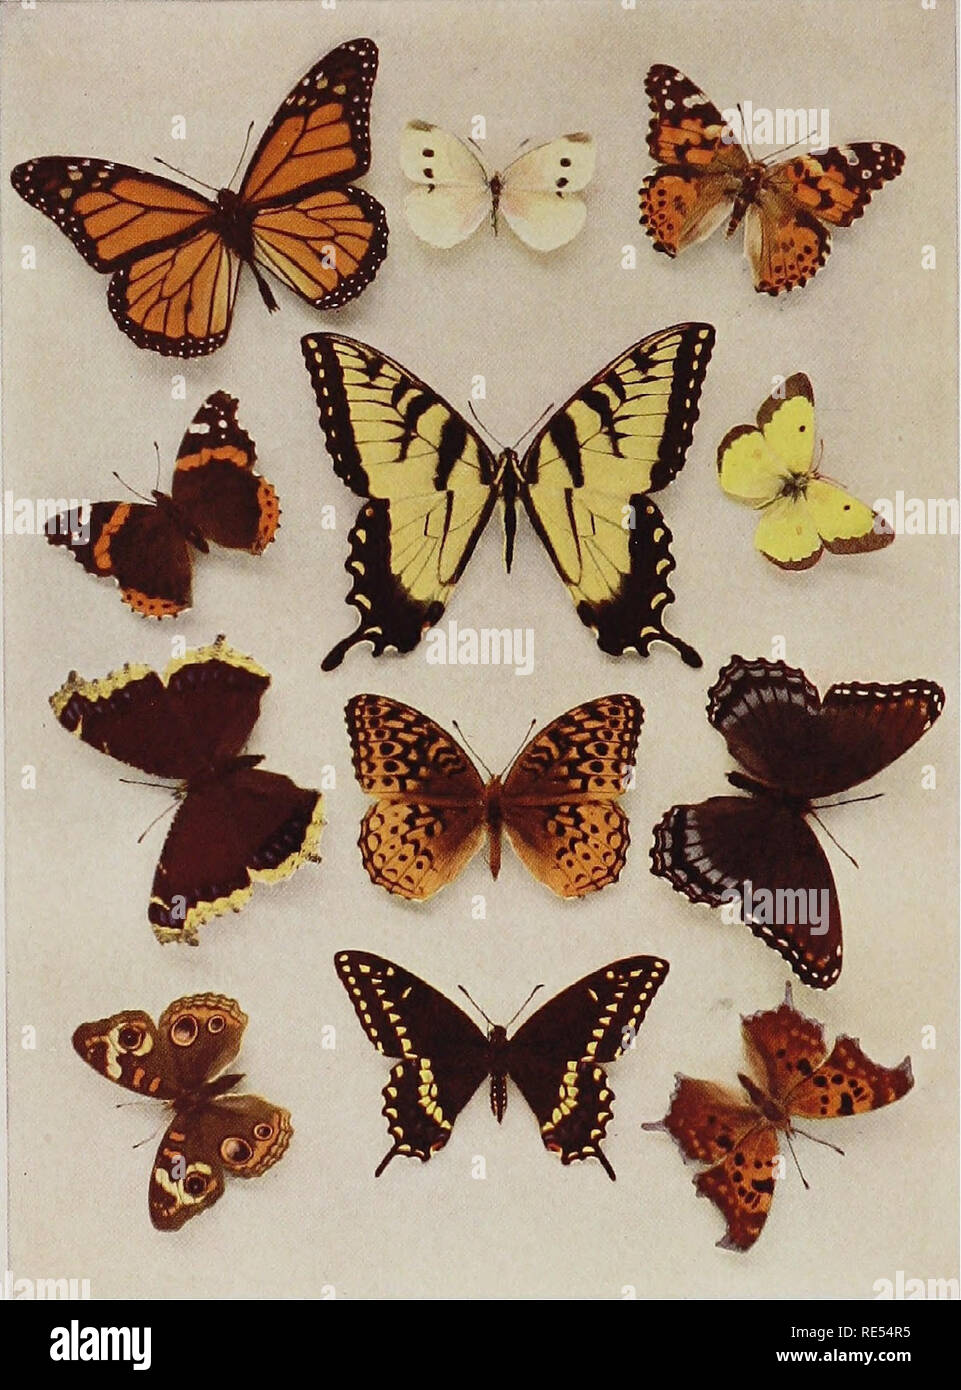 . Nature-study; a manual for teachers and students. Nature study. Monarch, S yhiL&gt;su&gt; ^/Â£.X!/yitS. Red admiral, .-^ r.niir^s.i iila.'a'!la. Mnuming cloak, .^ Buckeve. V Cahbagp butterfly, V TigtT swallow-tail, ^â ^: Papilio ,i,'/.nu:iis tiiruus. Great spangled fritillary, cS Black swallow-tail, cf Cnsmopolitan, ^ r,incssa c.trdiiL Roadside butterfly, c/ Jiinyjiiiis philodicc. Red-spotted purple, 9 tHruni specimens r lined by the Childretrs Museum, Brooklyn.) Molet-tip, &lt;j. Please note that these images are extracted from scanned page images that may have been digitally enhanced for r Stock Photo